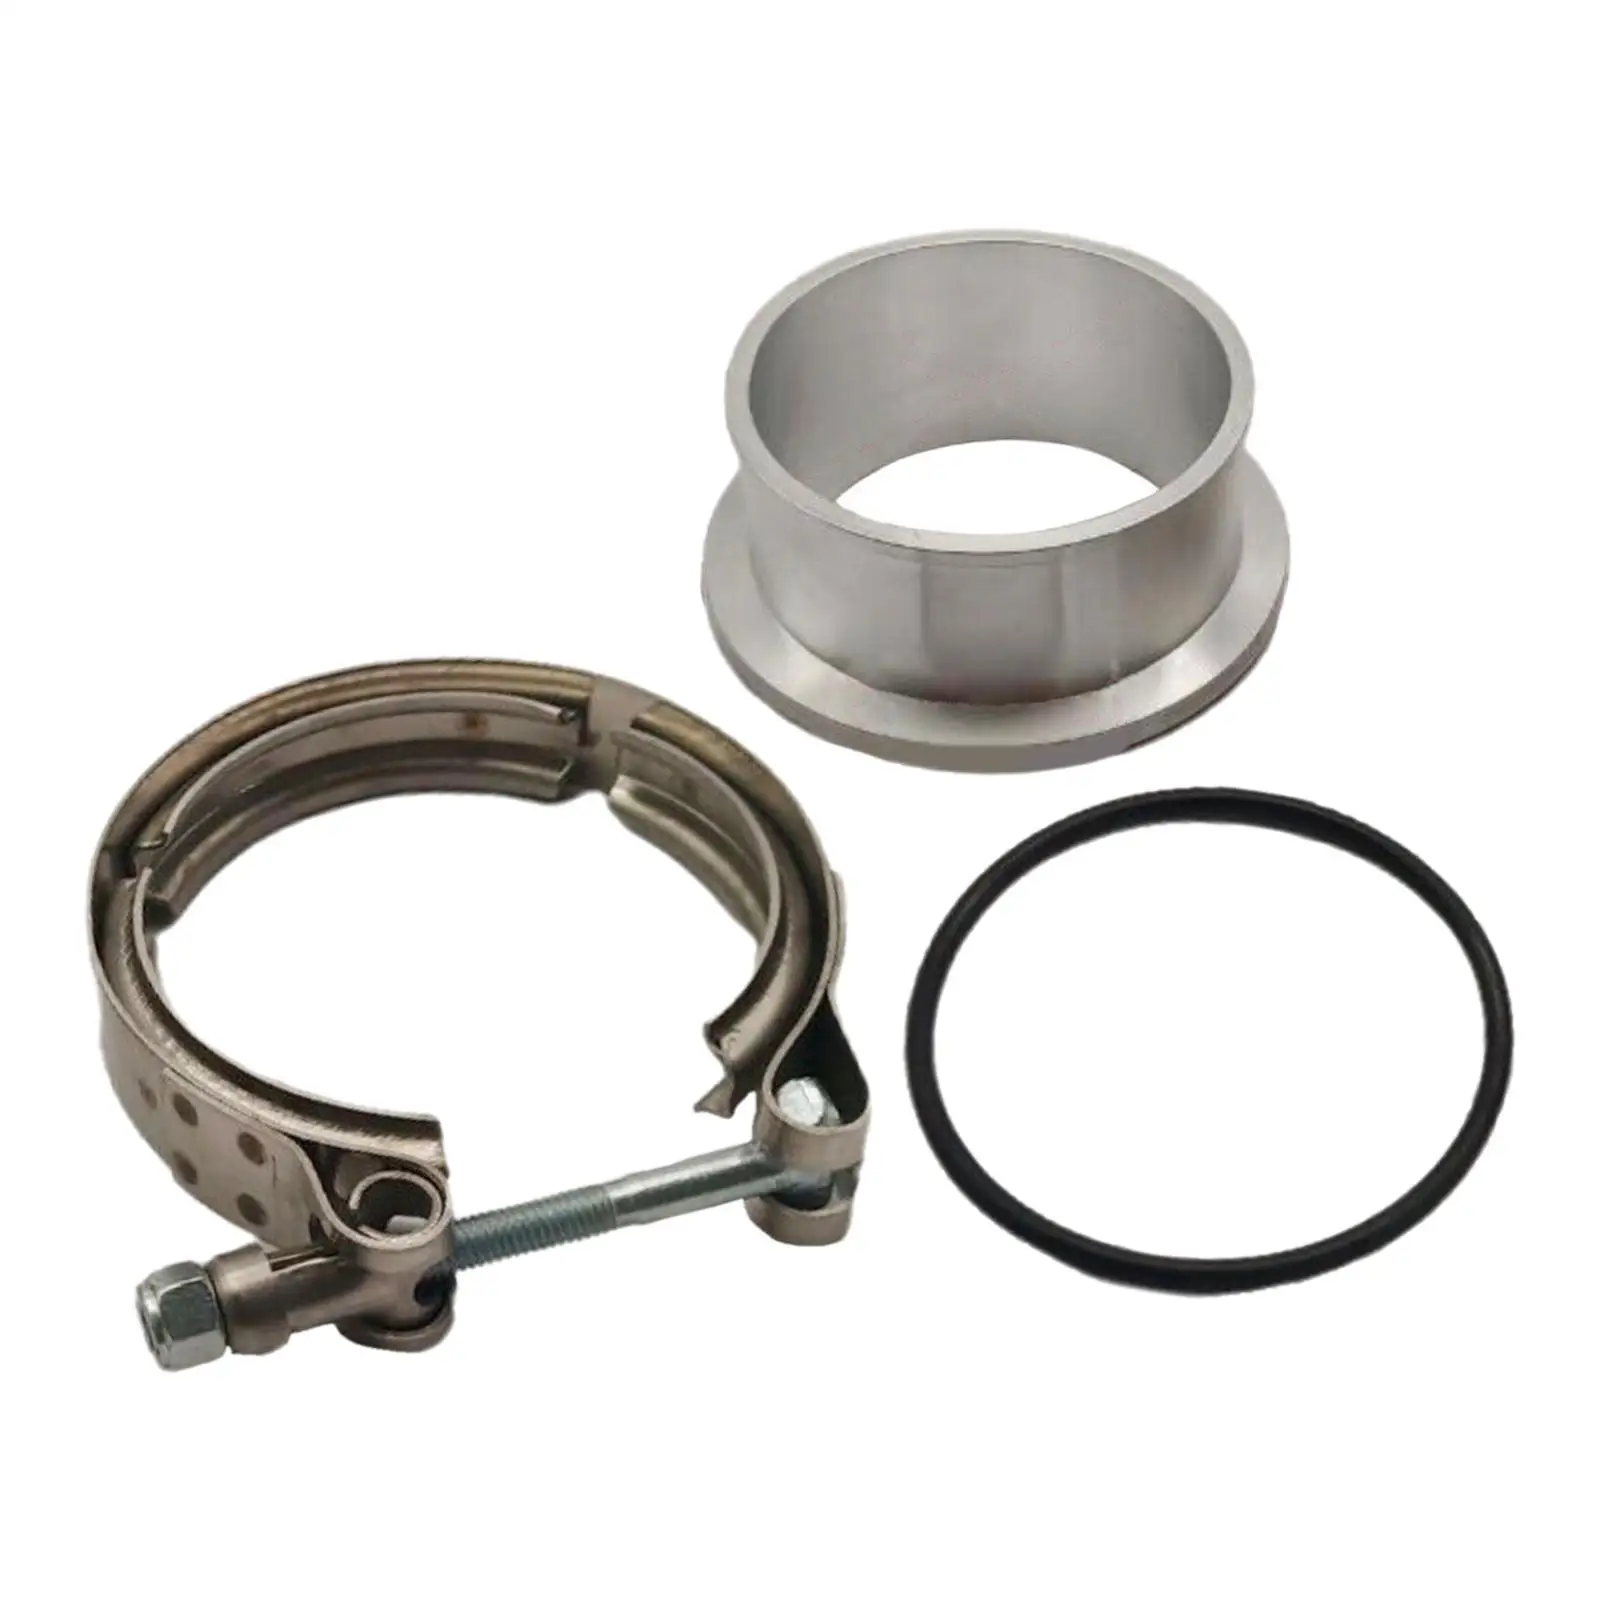 V Band Clamp Portable Sturdy Exhaust Pipe Clamp for Holset Cummins 5.9L